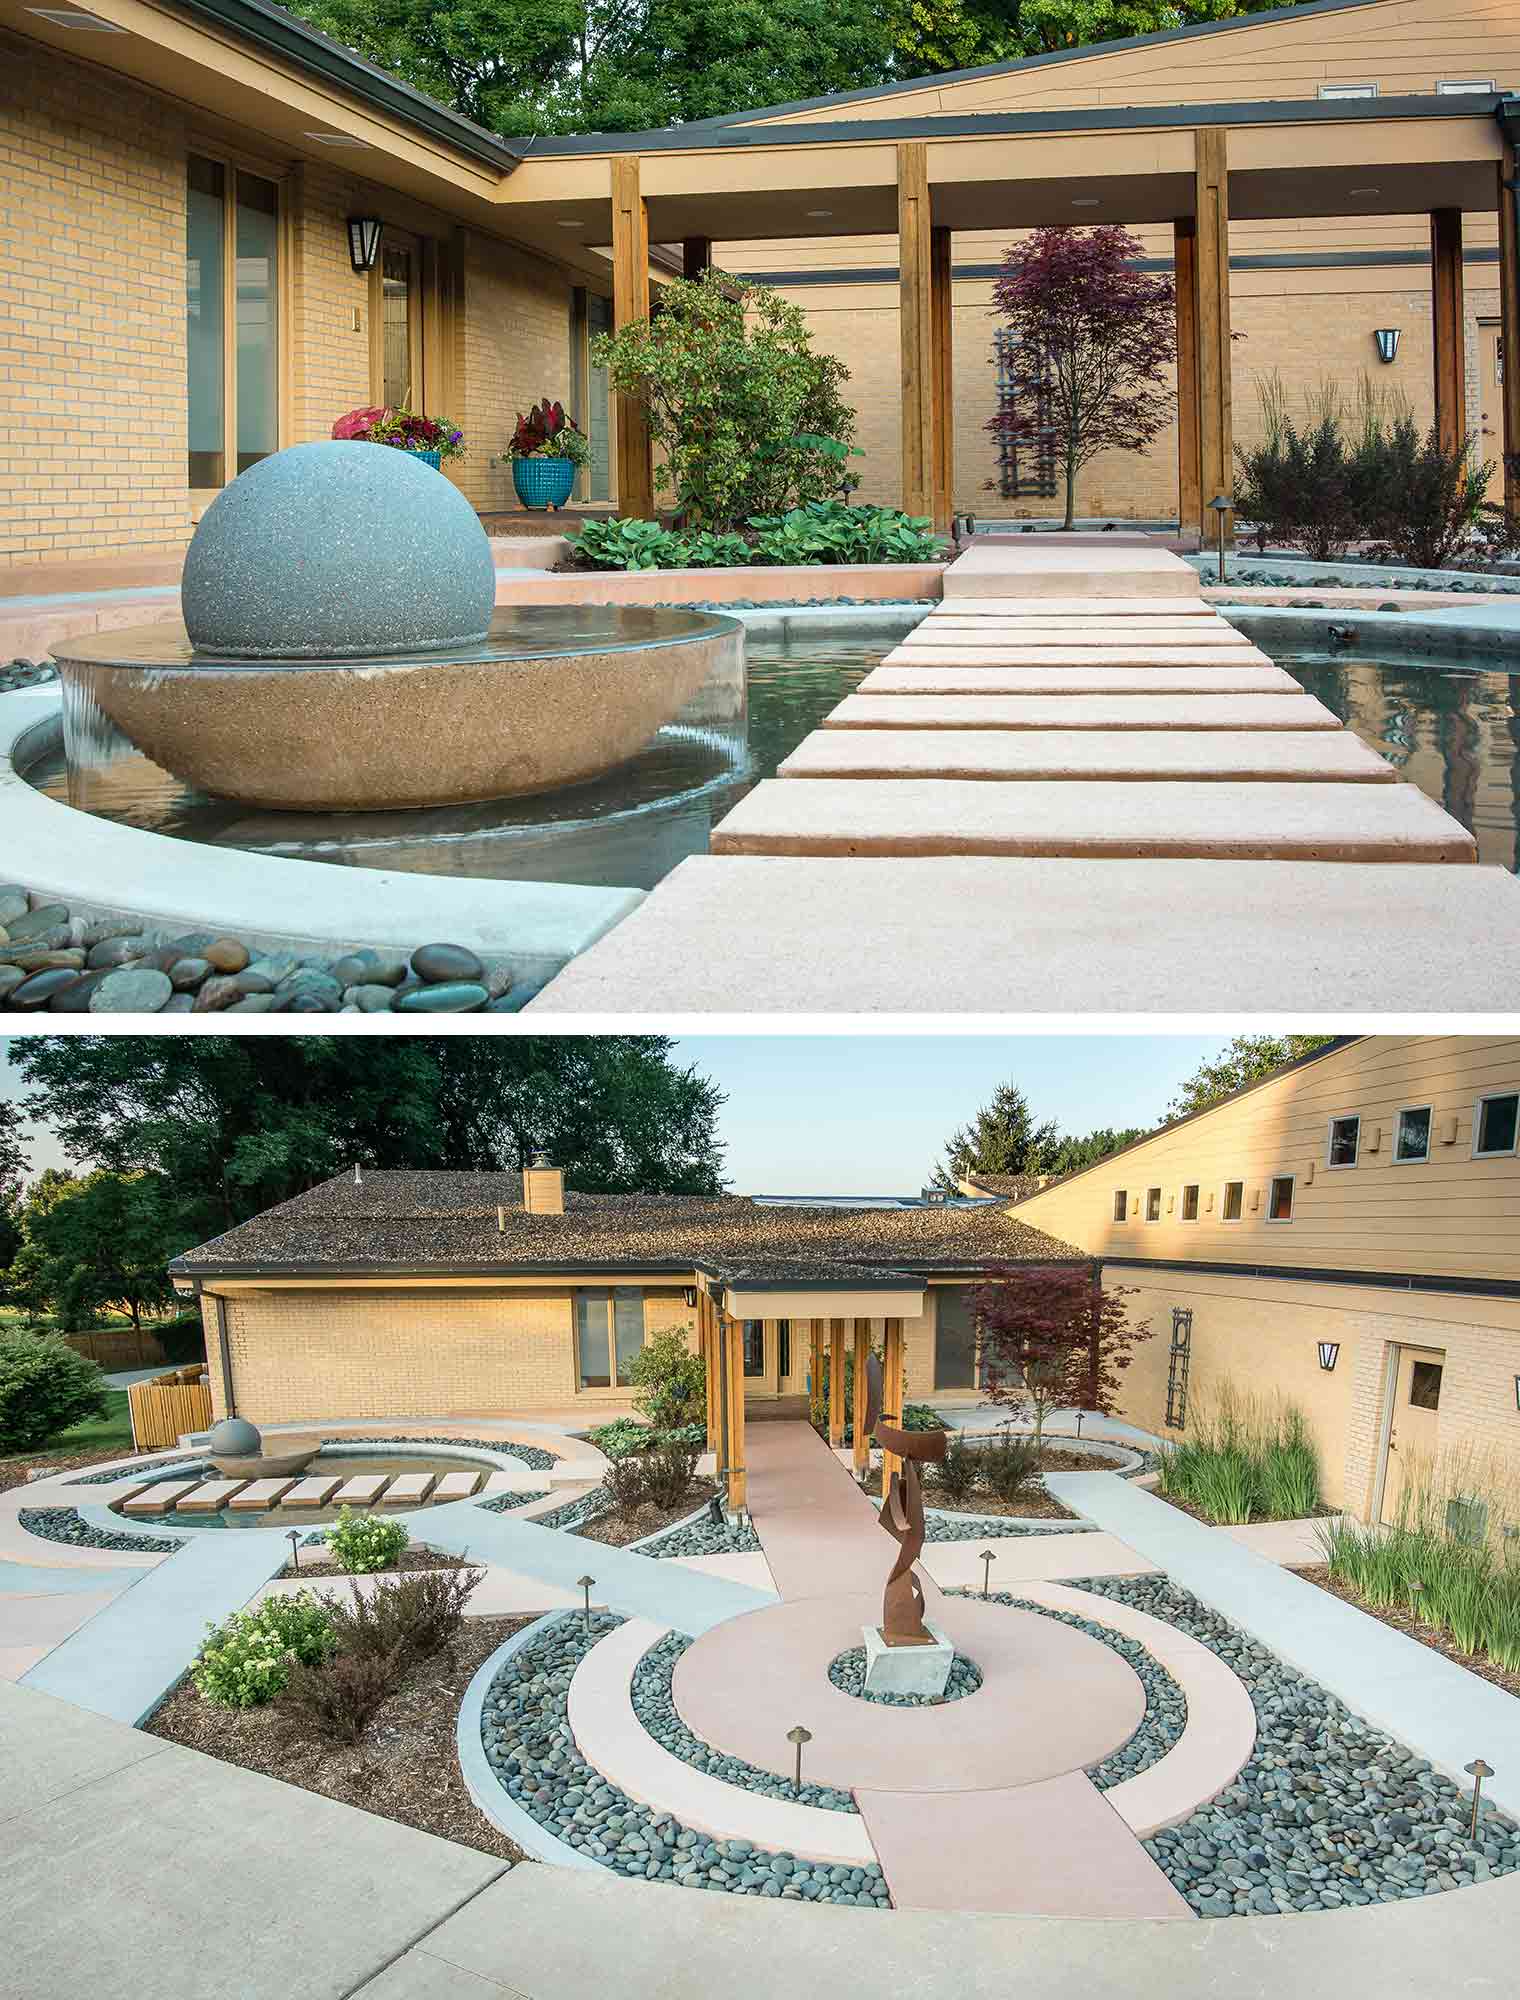 ball water fountain, reflecting pool with floating stepping stones, circle walkways, sculpture in zen courtyard entryway designed and built by Silent Rivers of Des Moines, Iowa